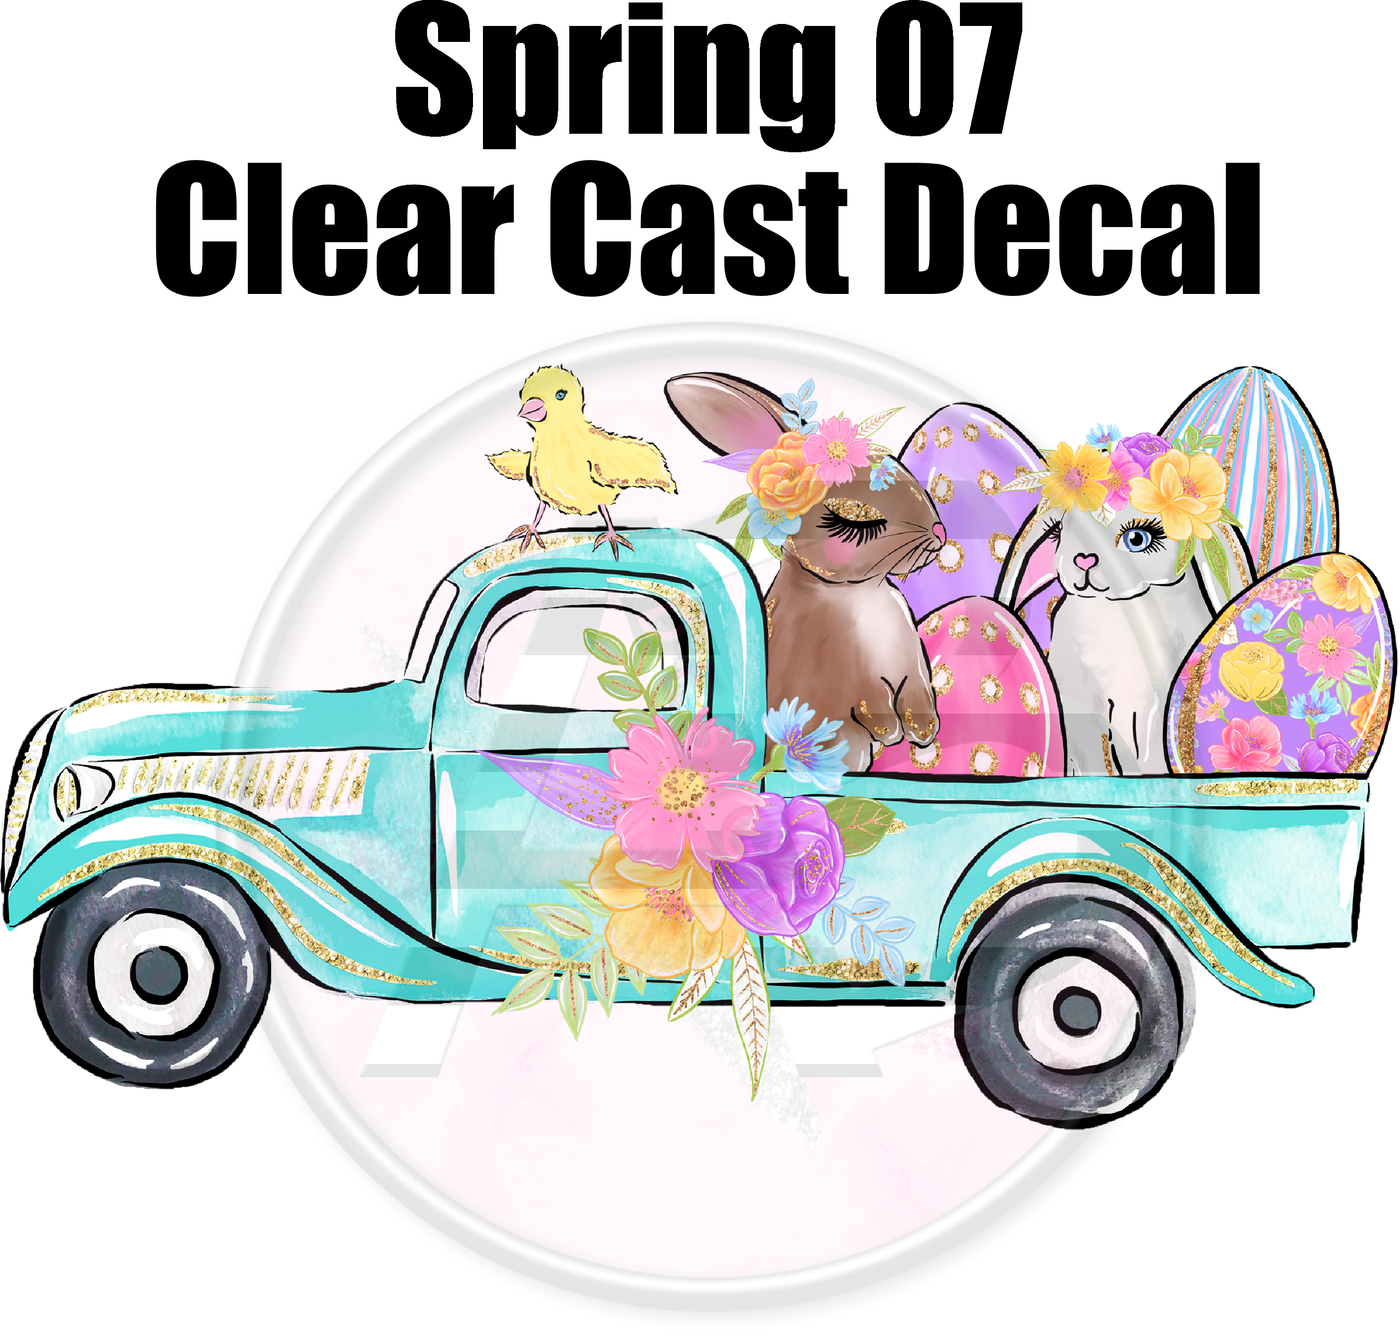 Spring 07 - Clear Cast Decal